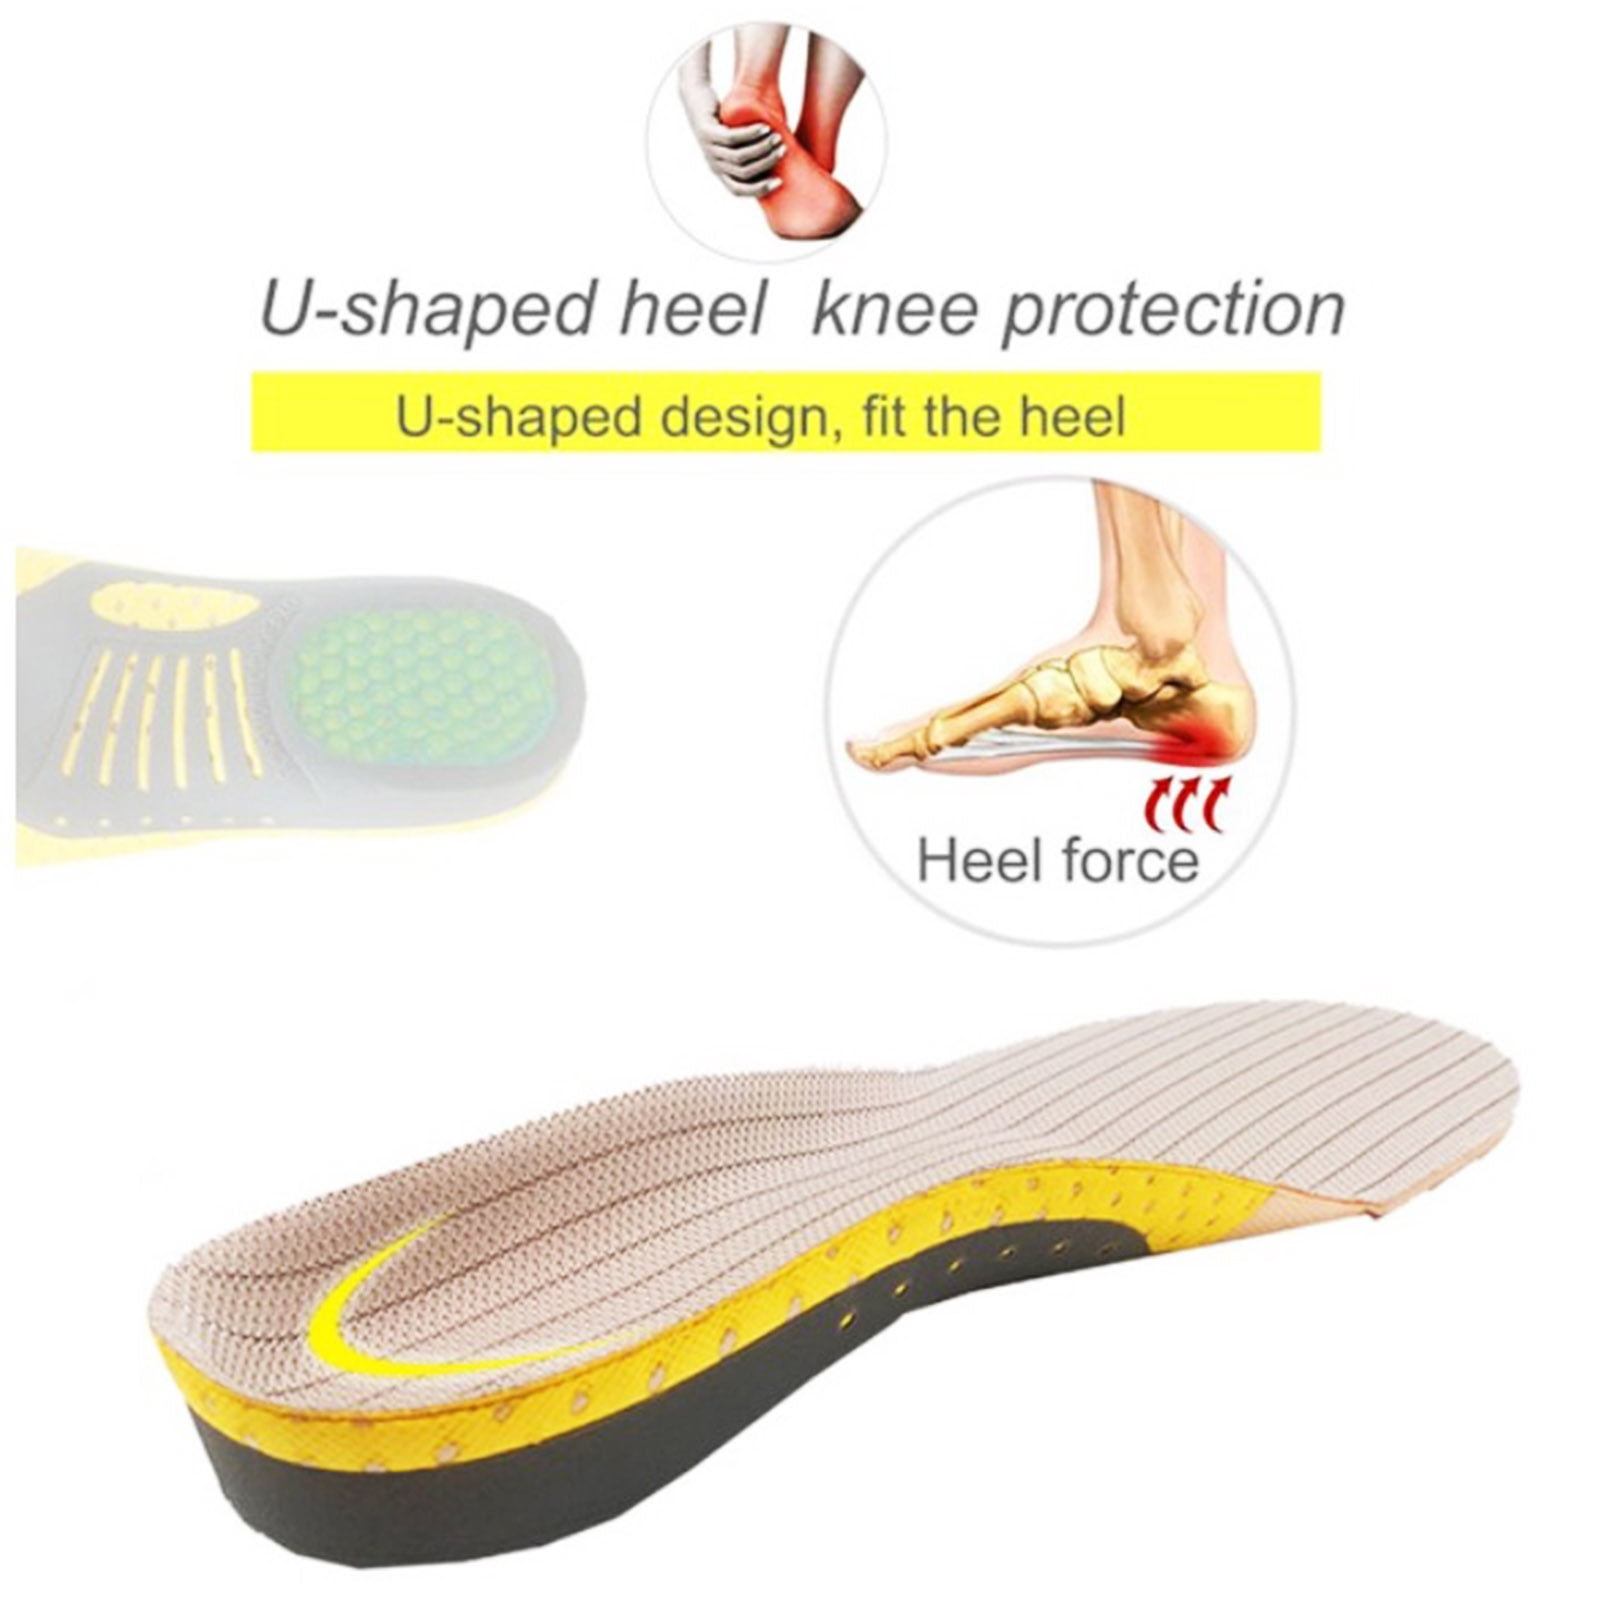  iFitna Plantar Fasciitis High Arch Support Insoles for Men  Women Orthotic Shoe Inserts Relief Feet Pain Flat Feet : Health & Household